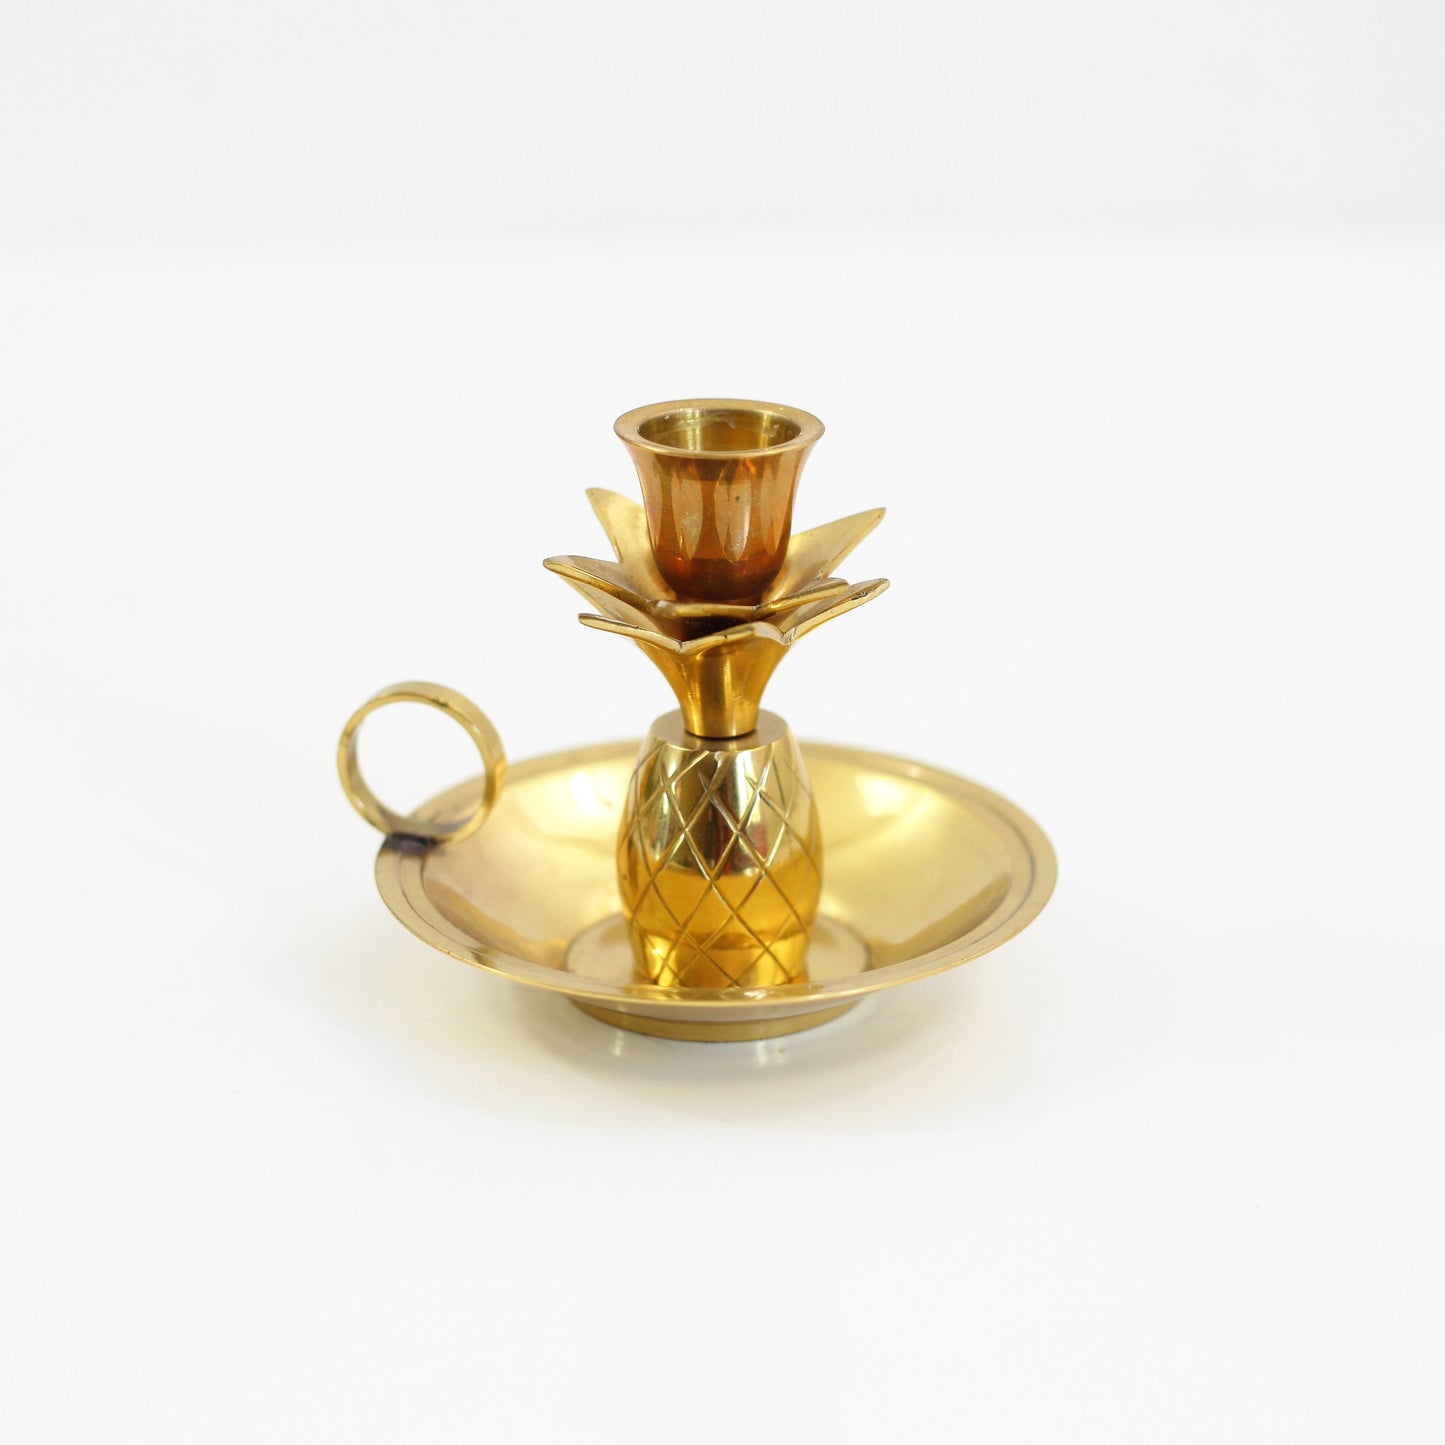 SOLD - Vintage Brass Pineapple Candlestick